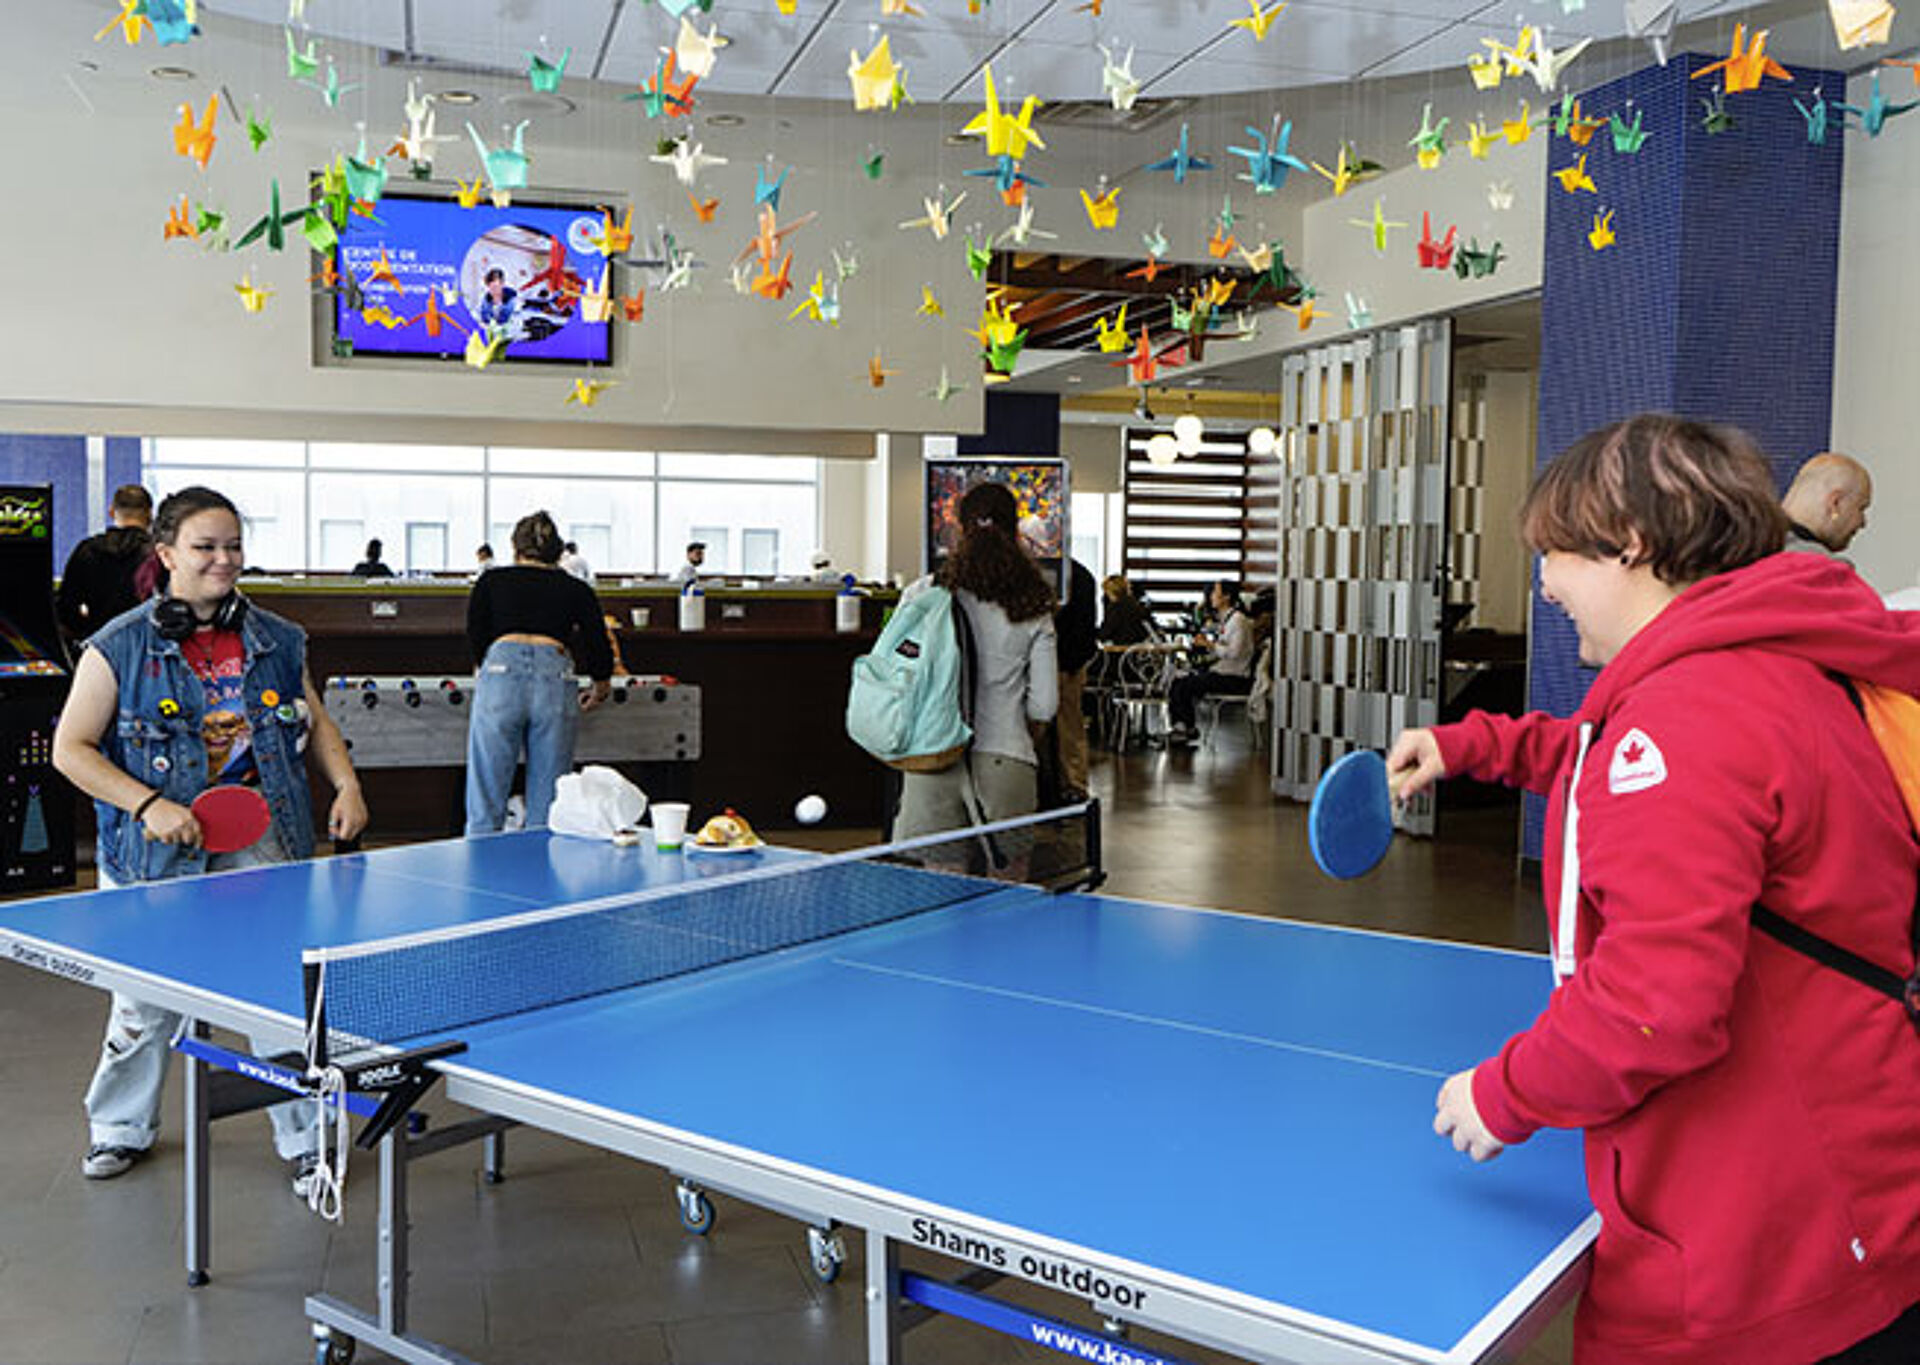 People enjoying a game of ping pong in a relaxed indoor setting with origami decorations overhead.